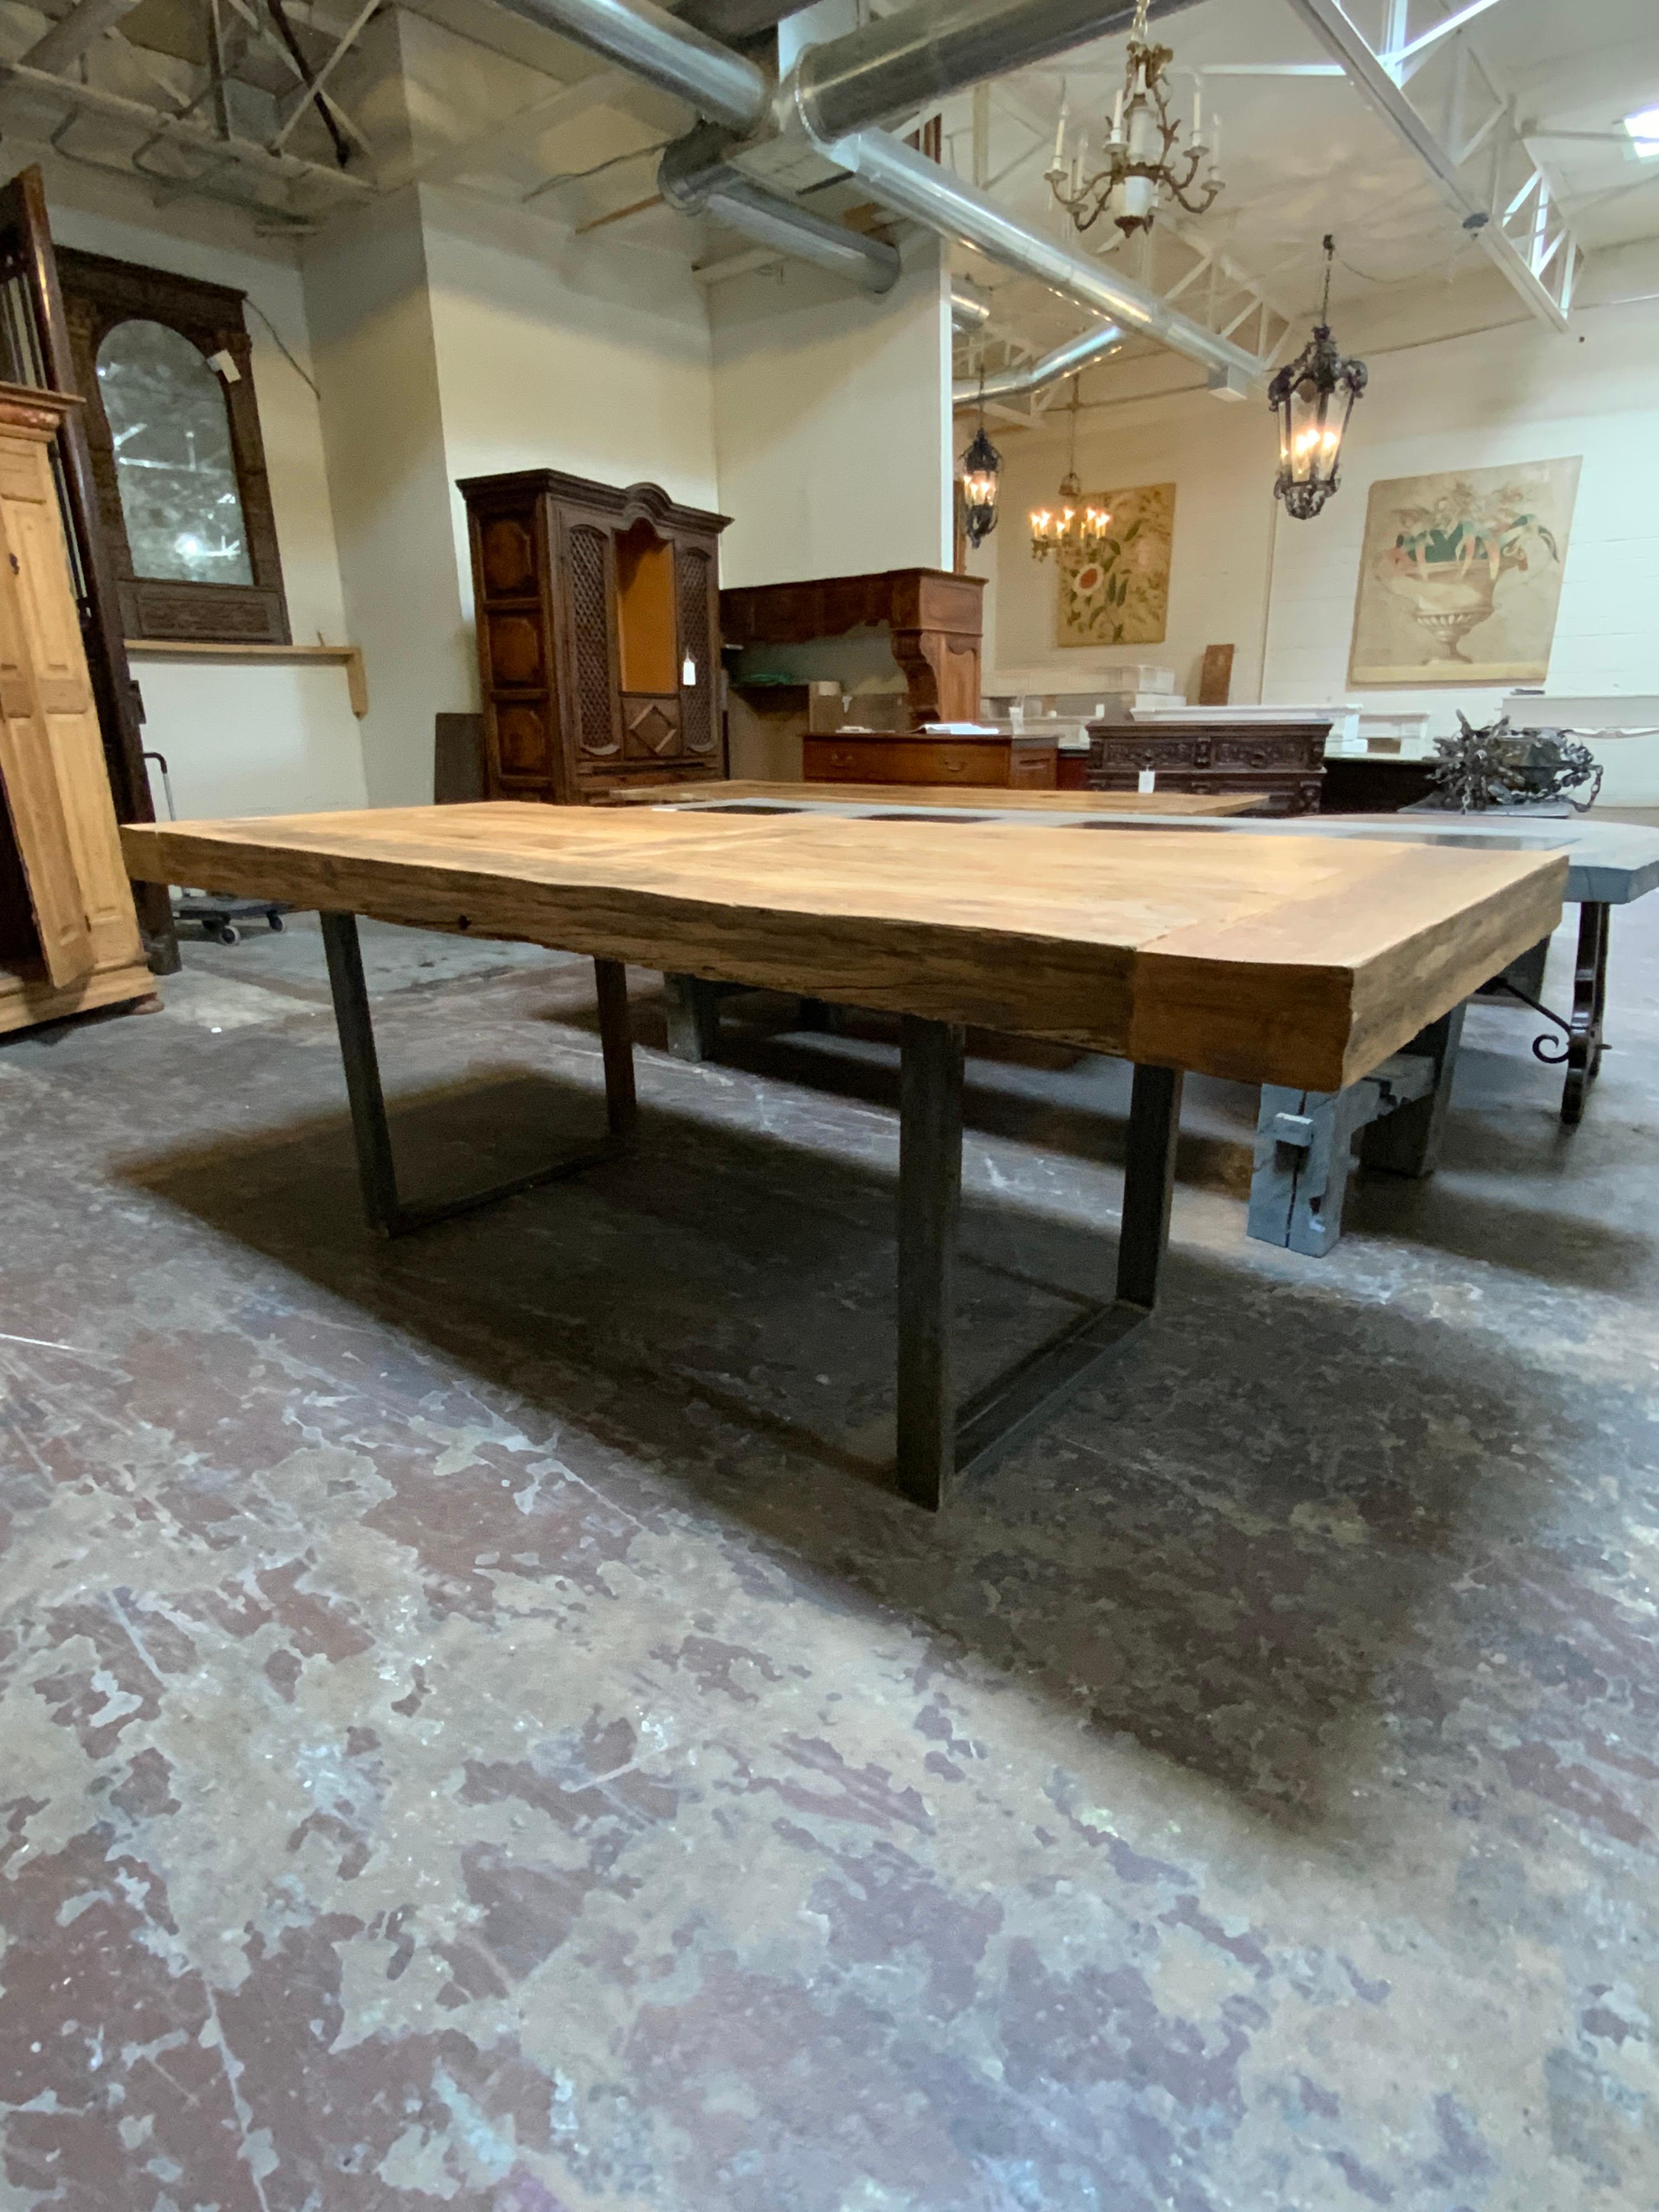 Beautiful hand made table measuring over 8 ft long. This eye-catching table is made of antique oak. Origin France.